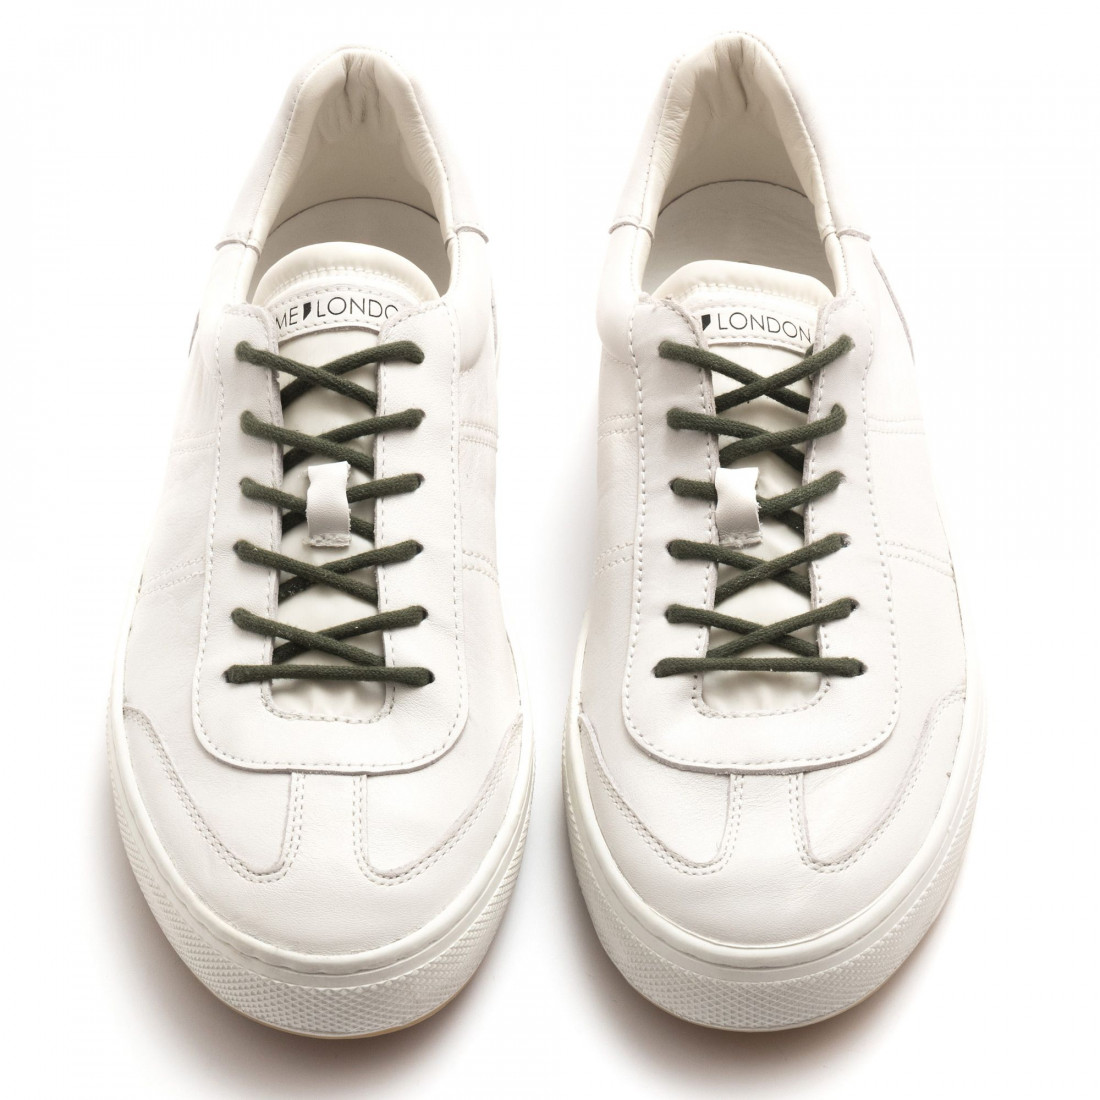 White Crime London Tennis sneaker in leather